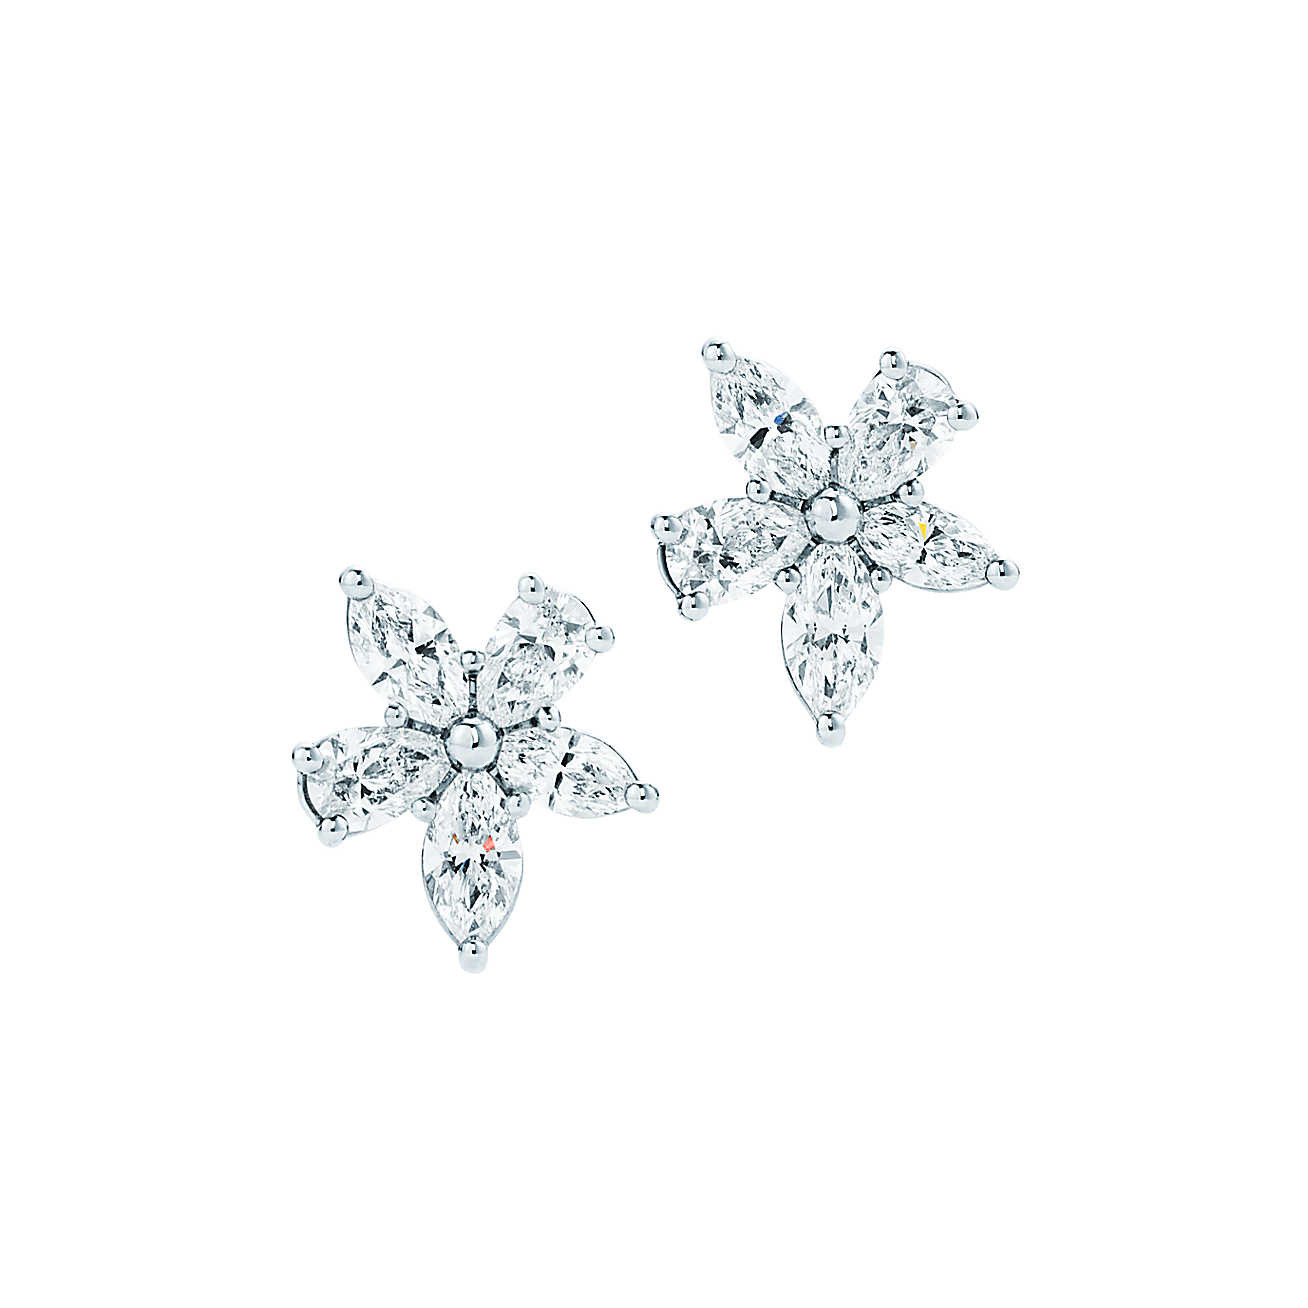 Tiffany Victoria Earrings
 Tiffany Victoria™ mixed cluster earrings in platinum with